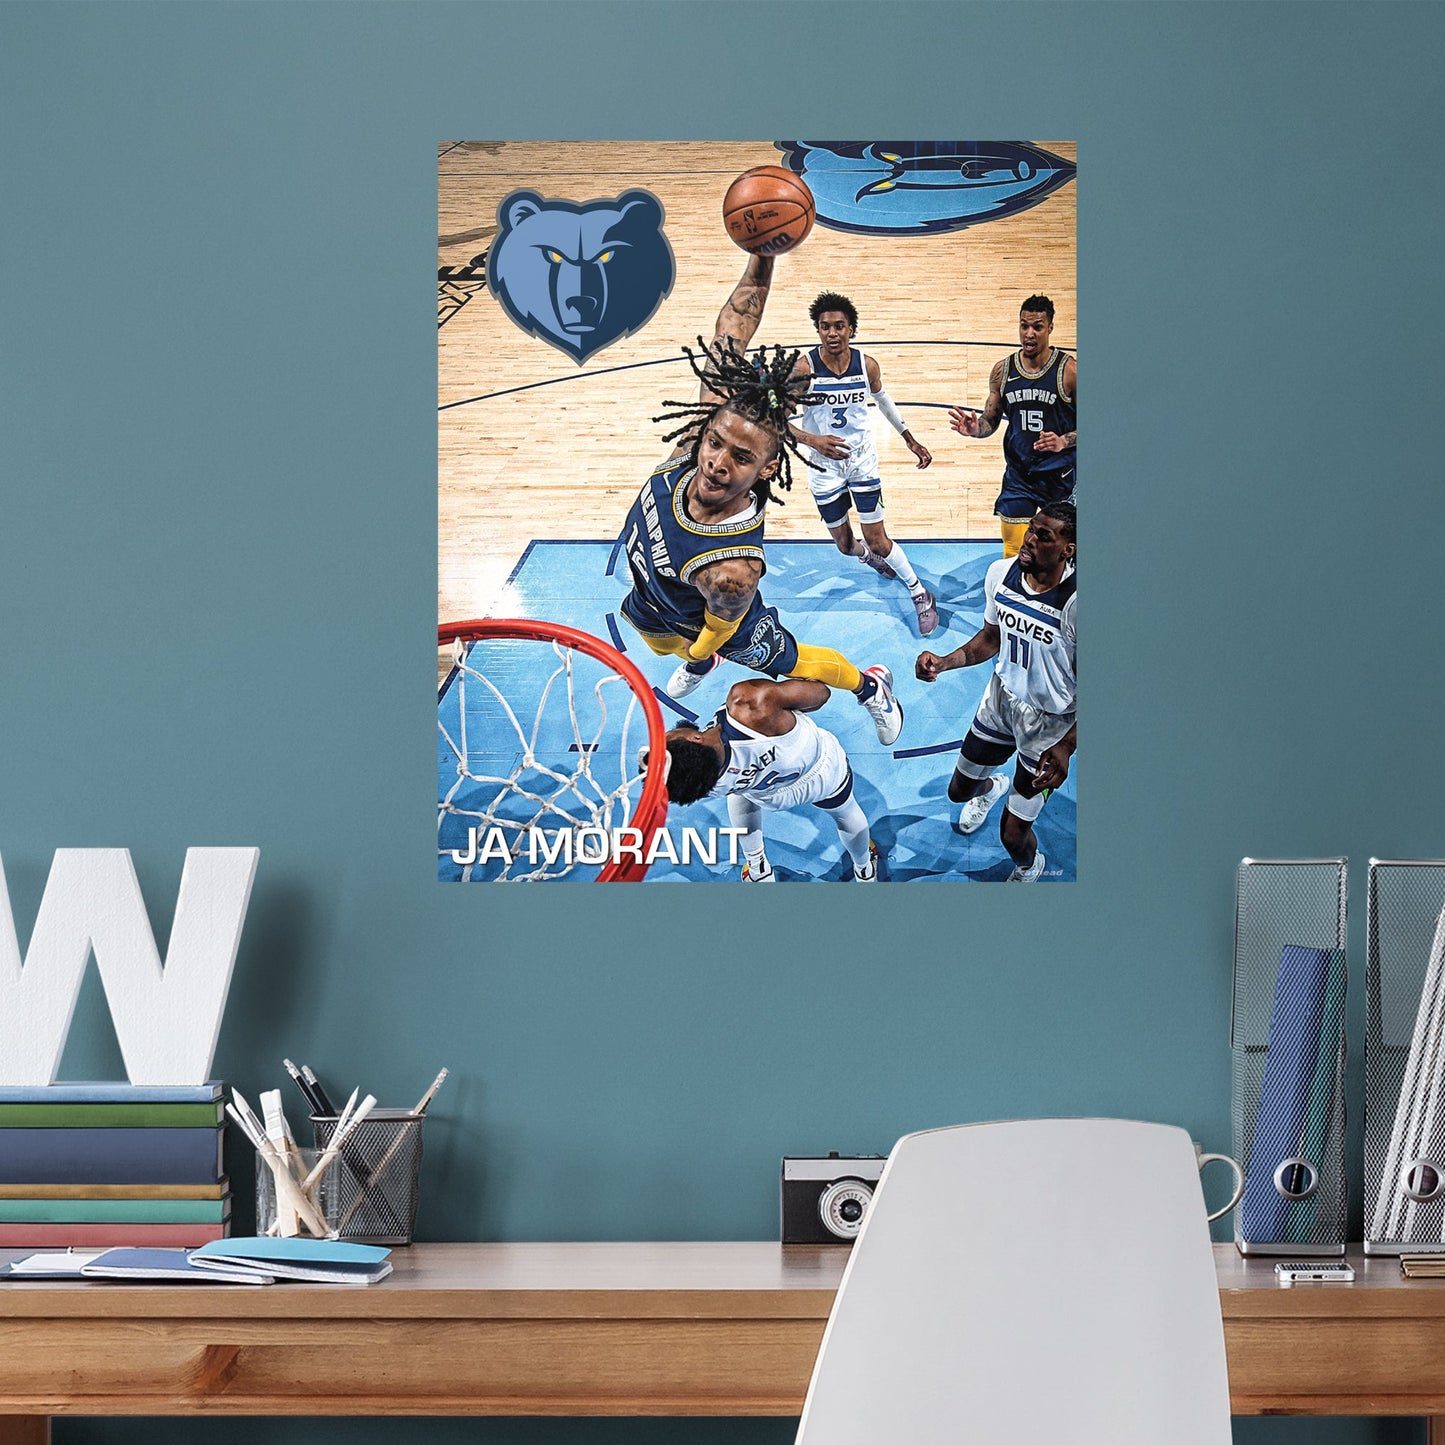 Memphis Grizzlies: Ja Morant Playoff Dunk Poster - Officially Licensed NBA Removable Adhesive Decal